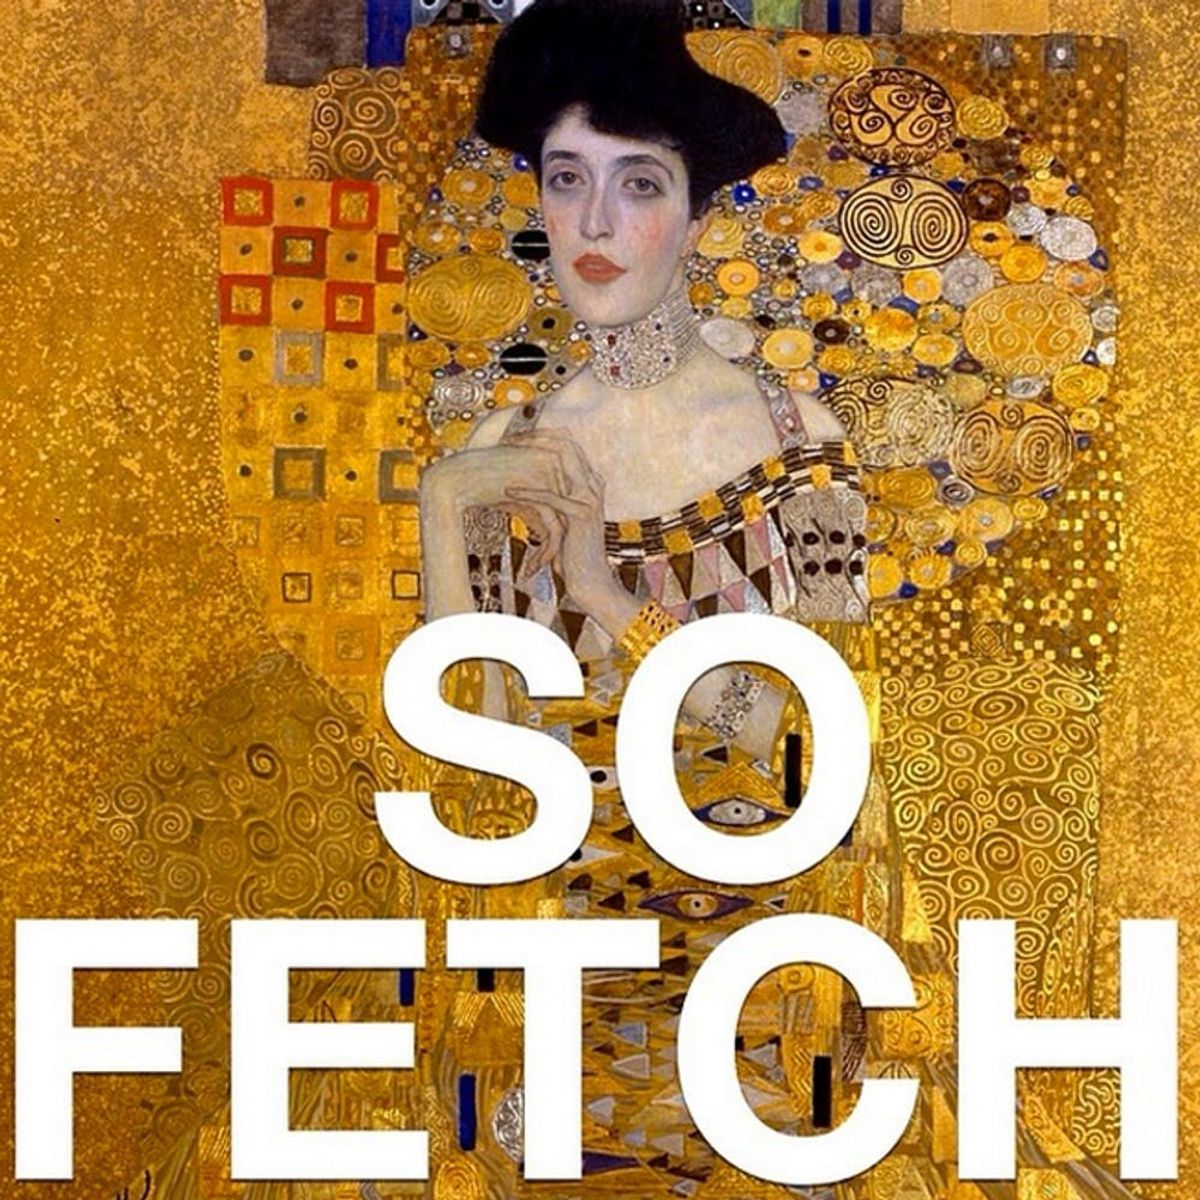 Brush Up on Your Art History With Mean Girls